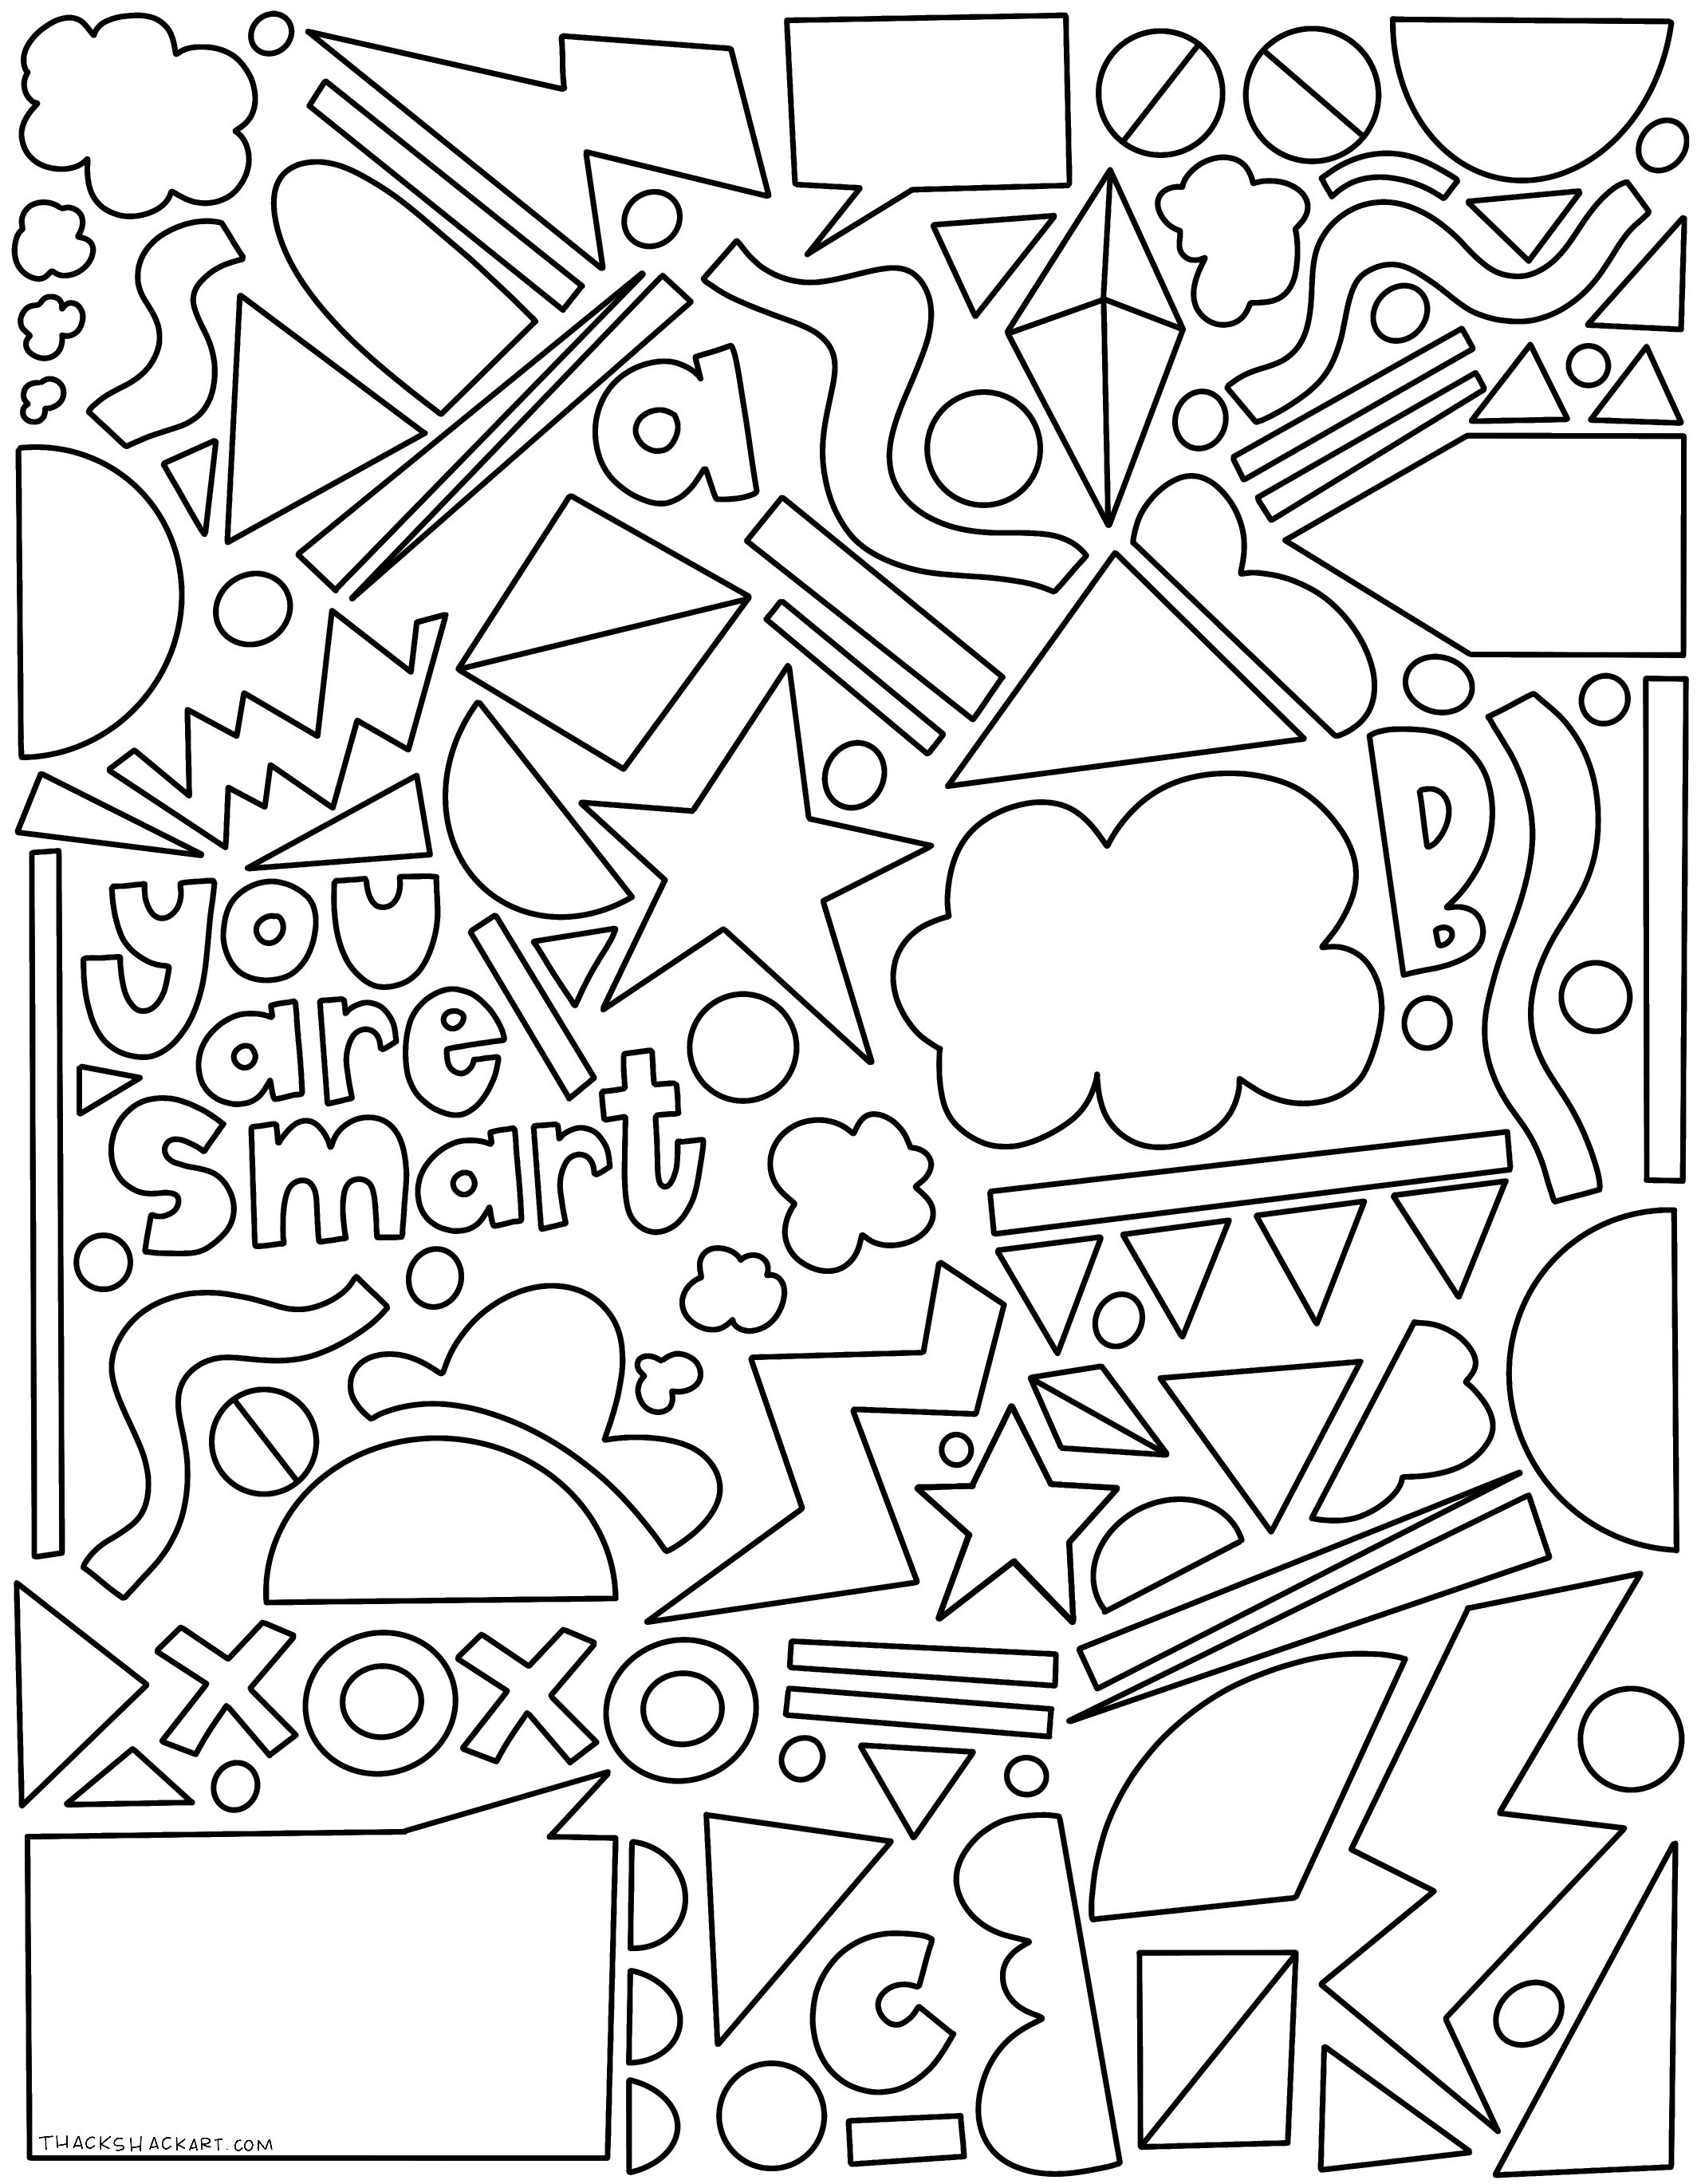 You Are Smart Coloring Page | Thackshack Art